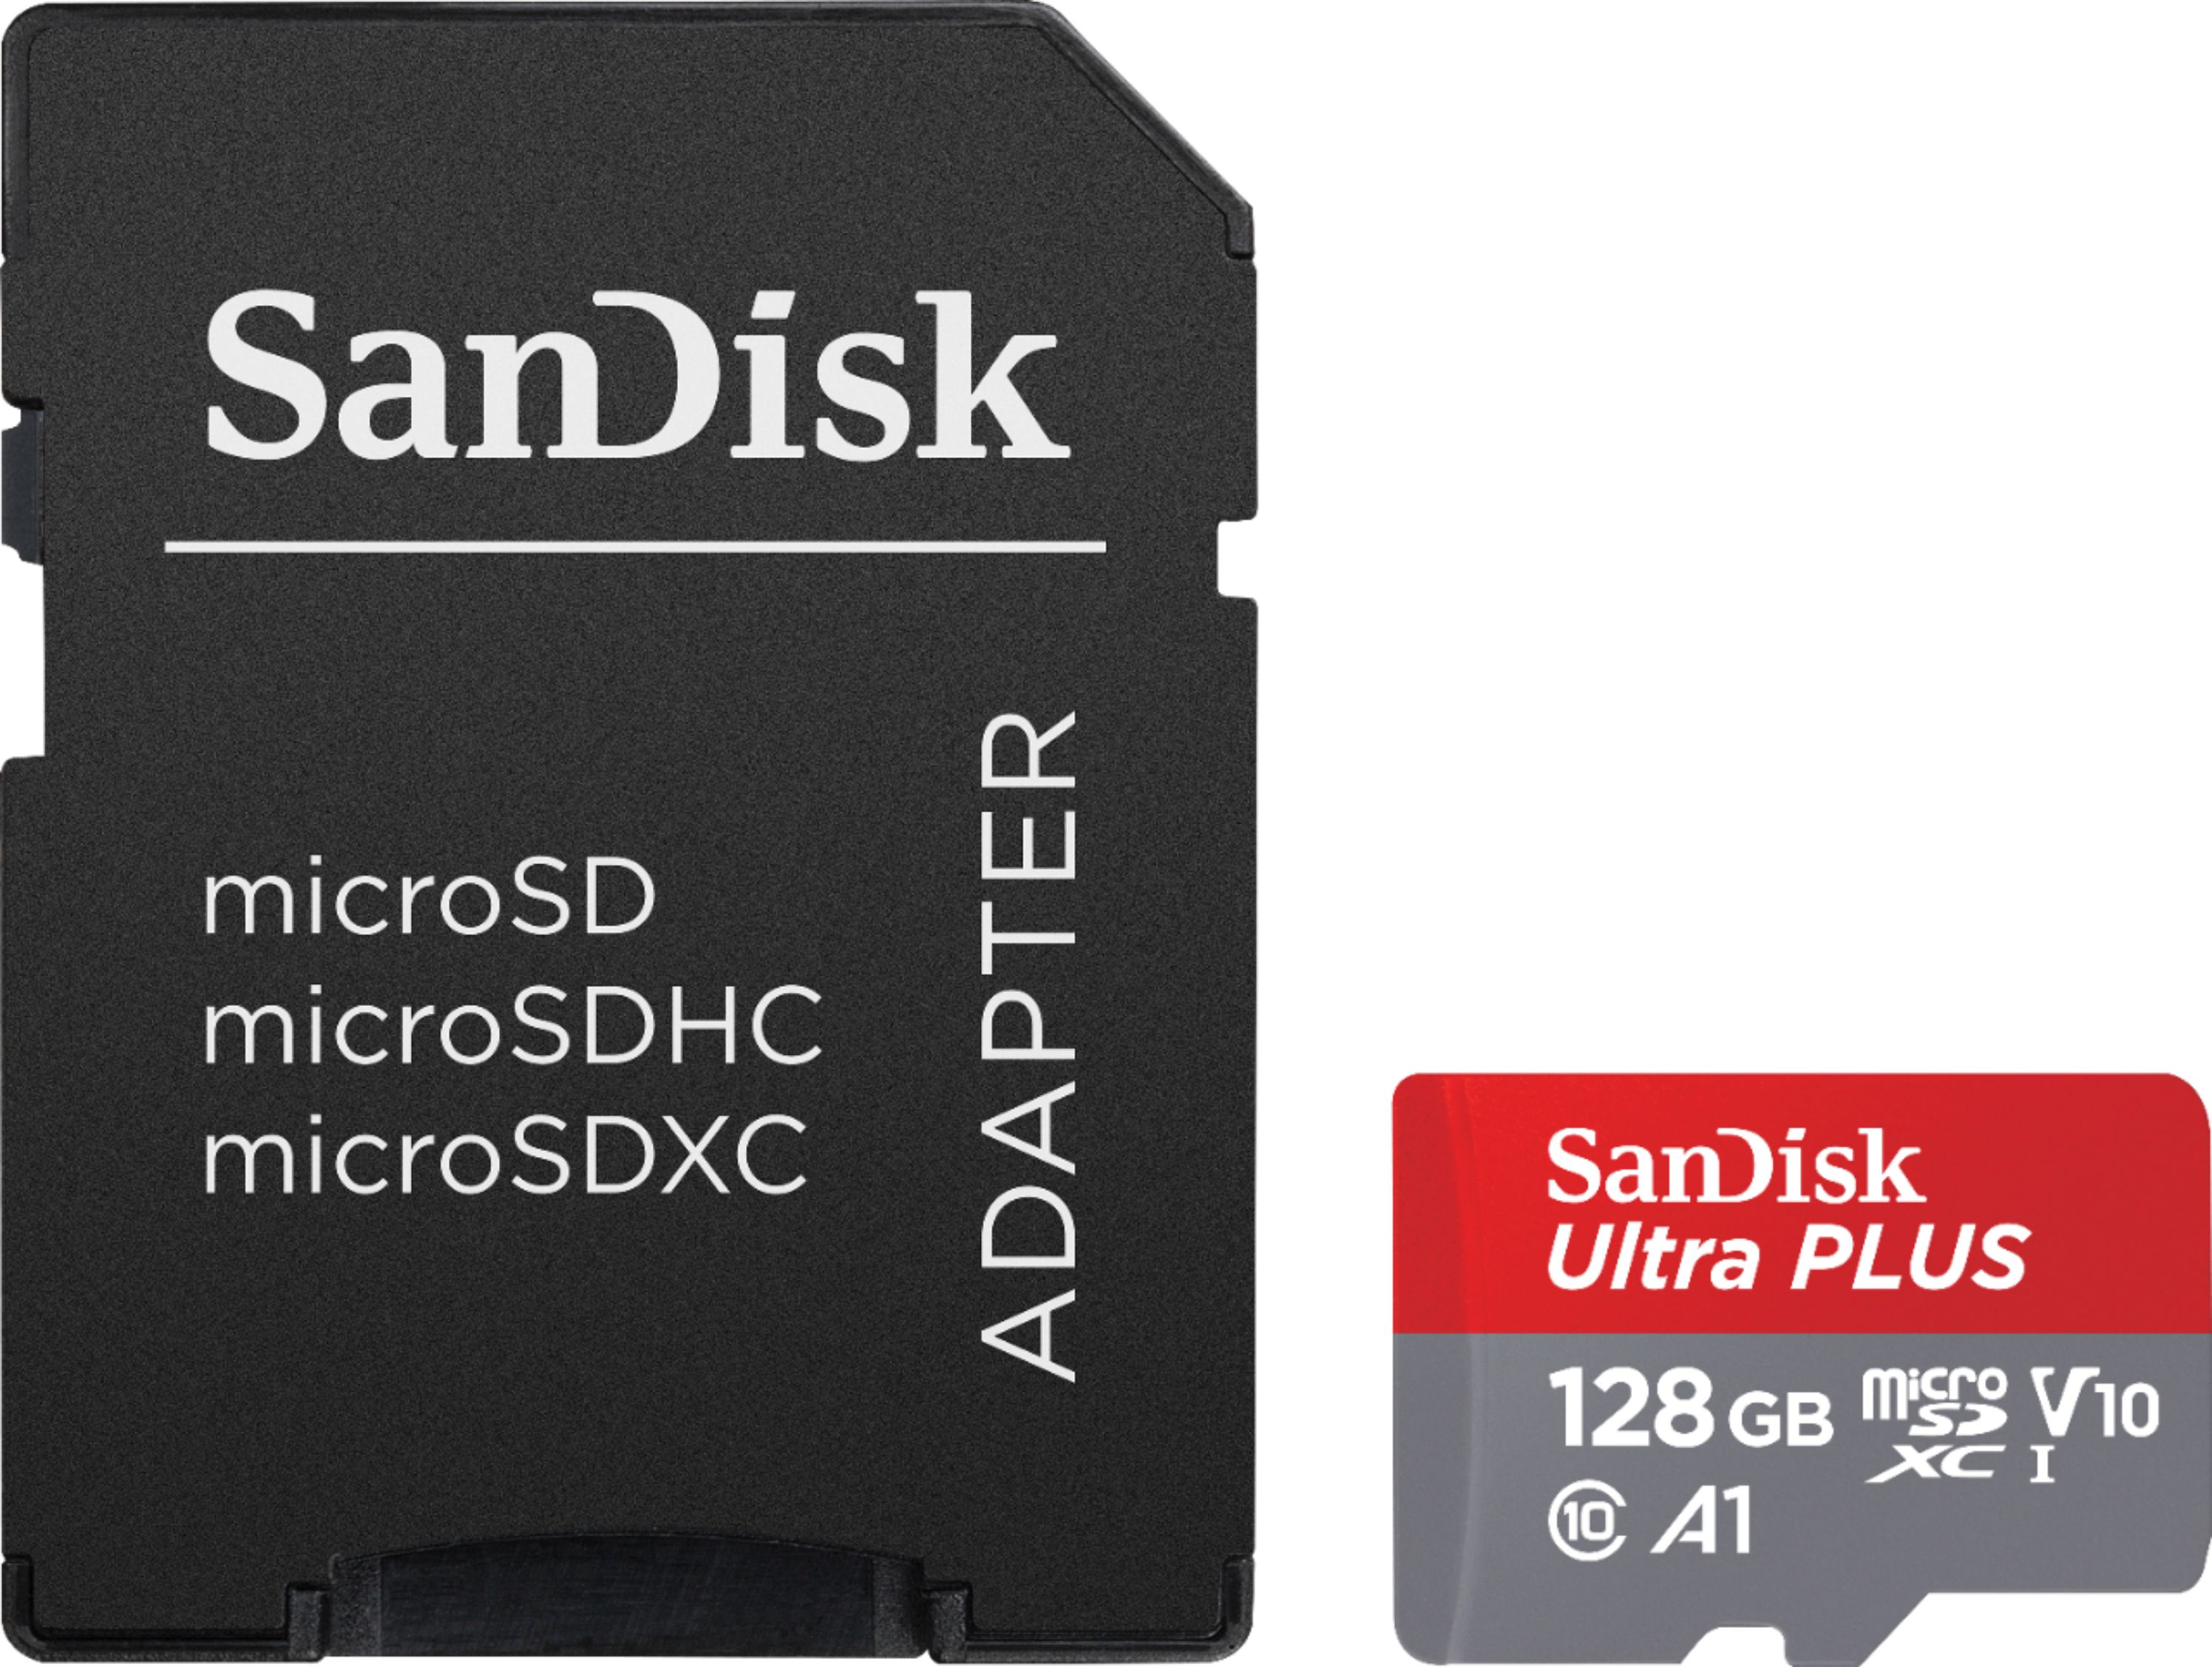 SanDisk Ultra microSD UHS-I cards deliver the world's fastest 1.5